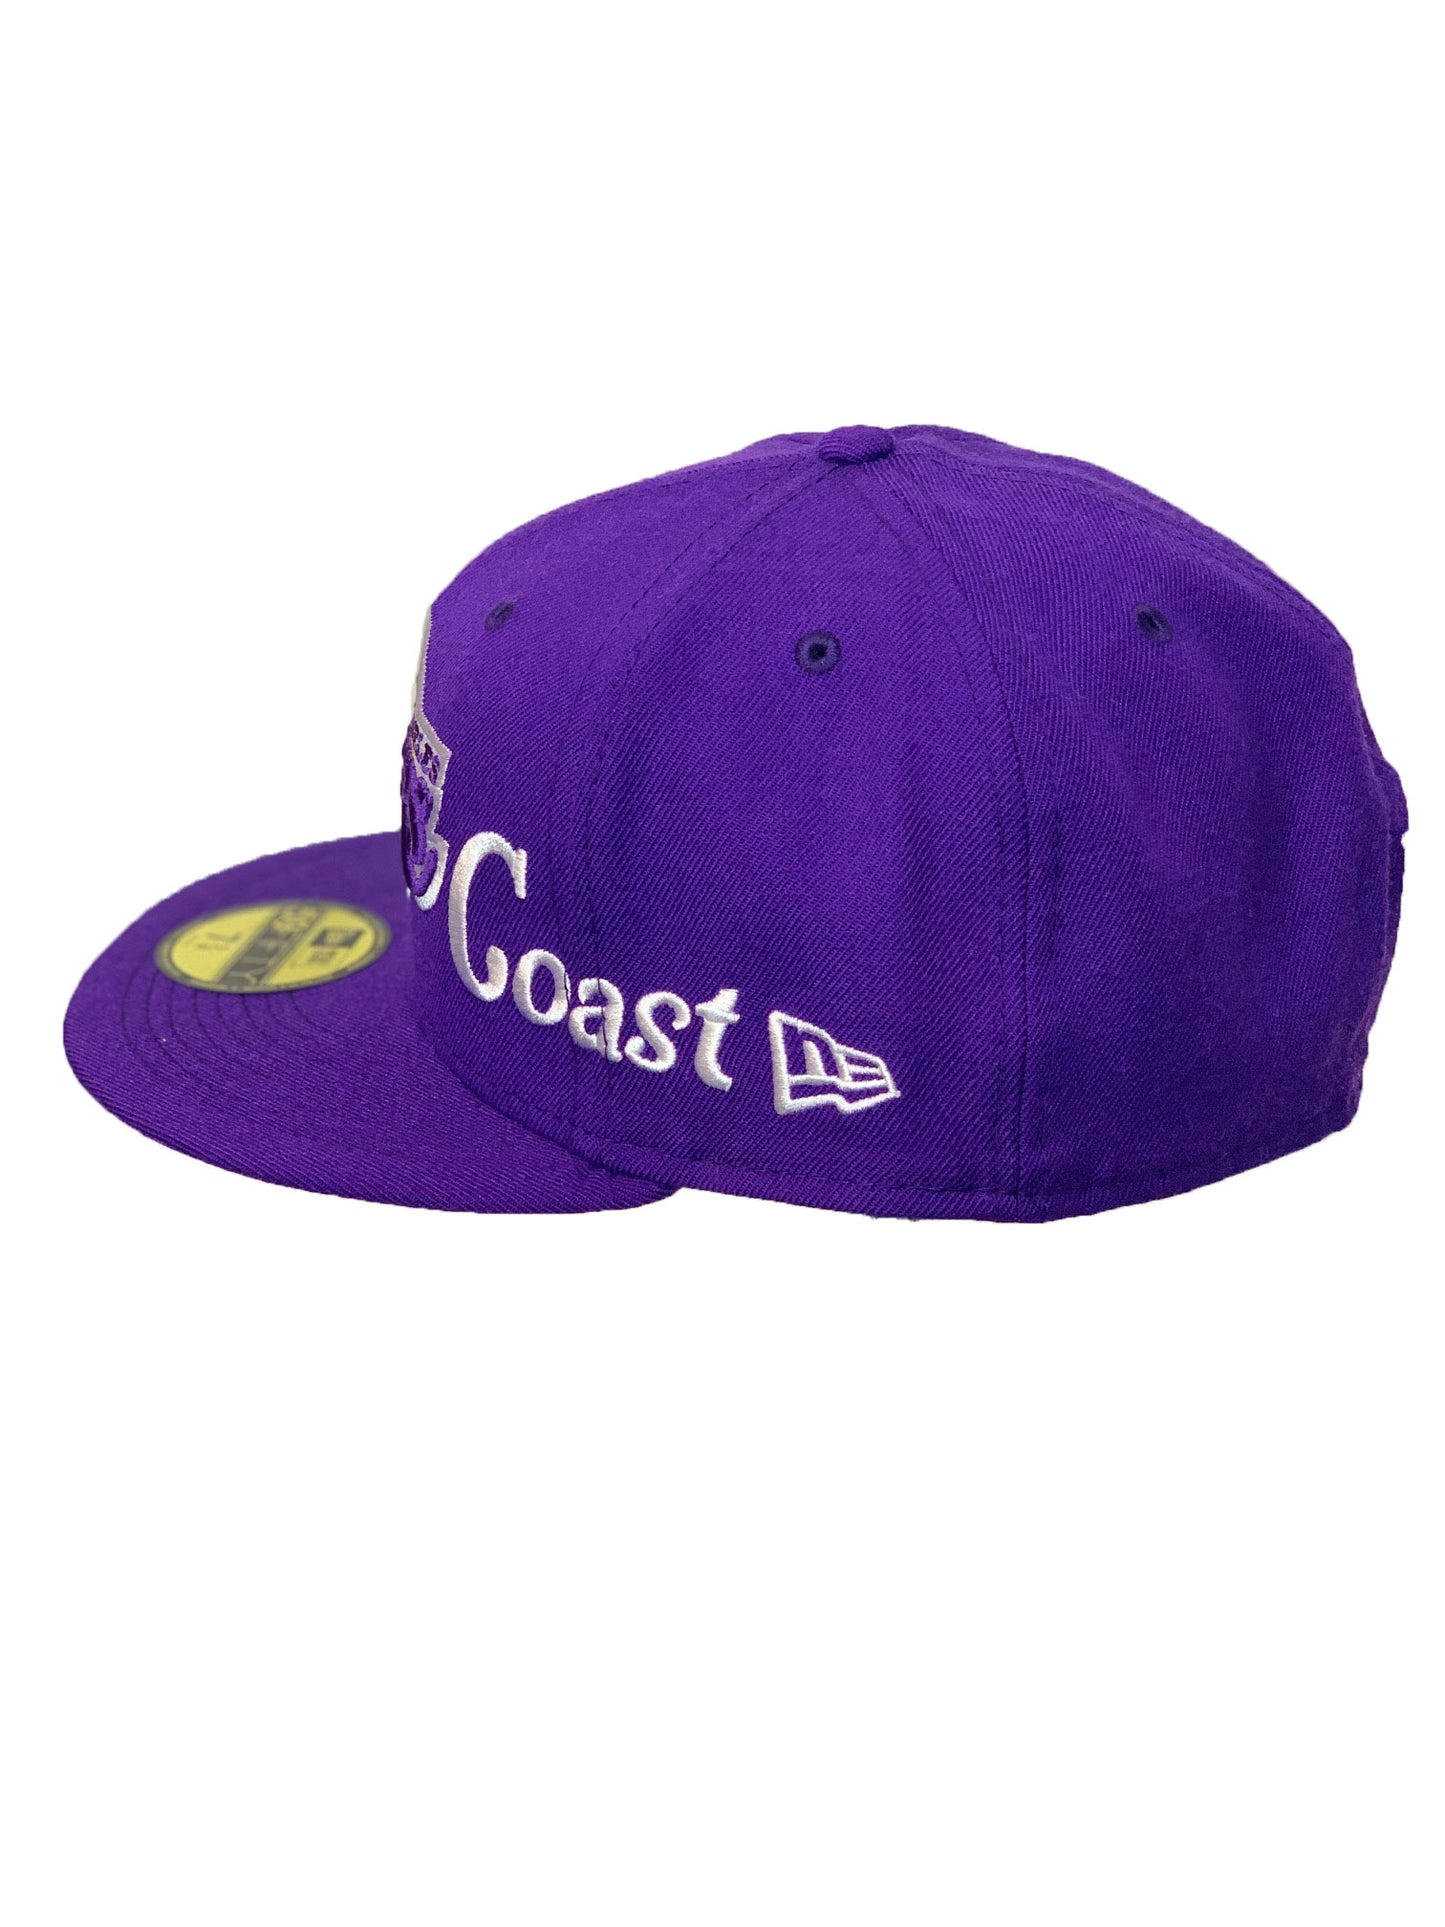 LOS ANGELES LAKERS 9524 CITY NICKNAME 59FIFTY